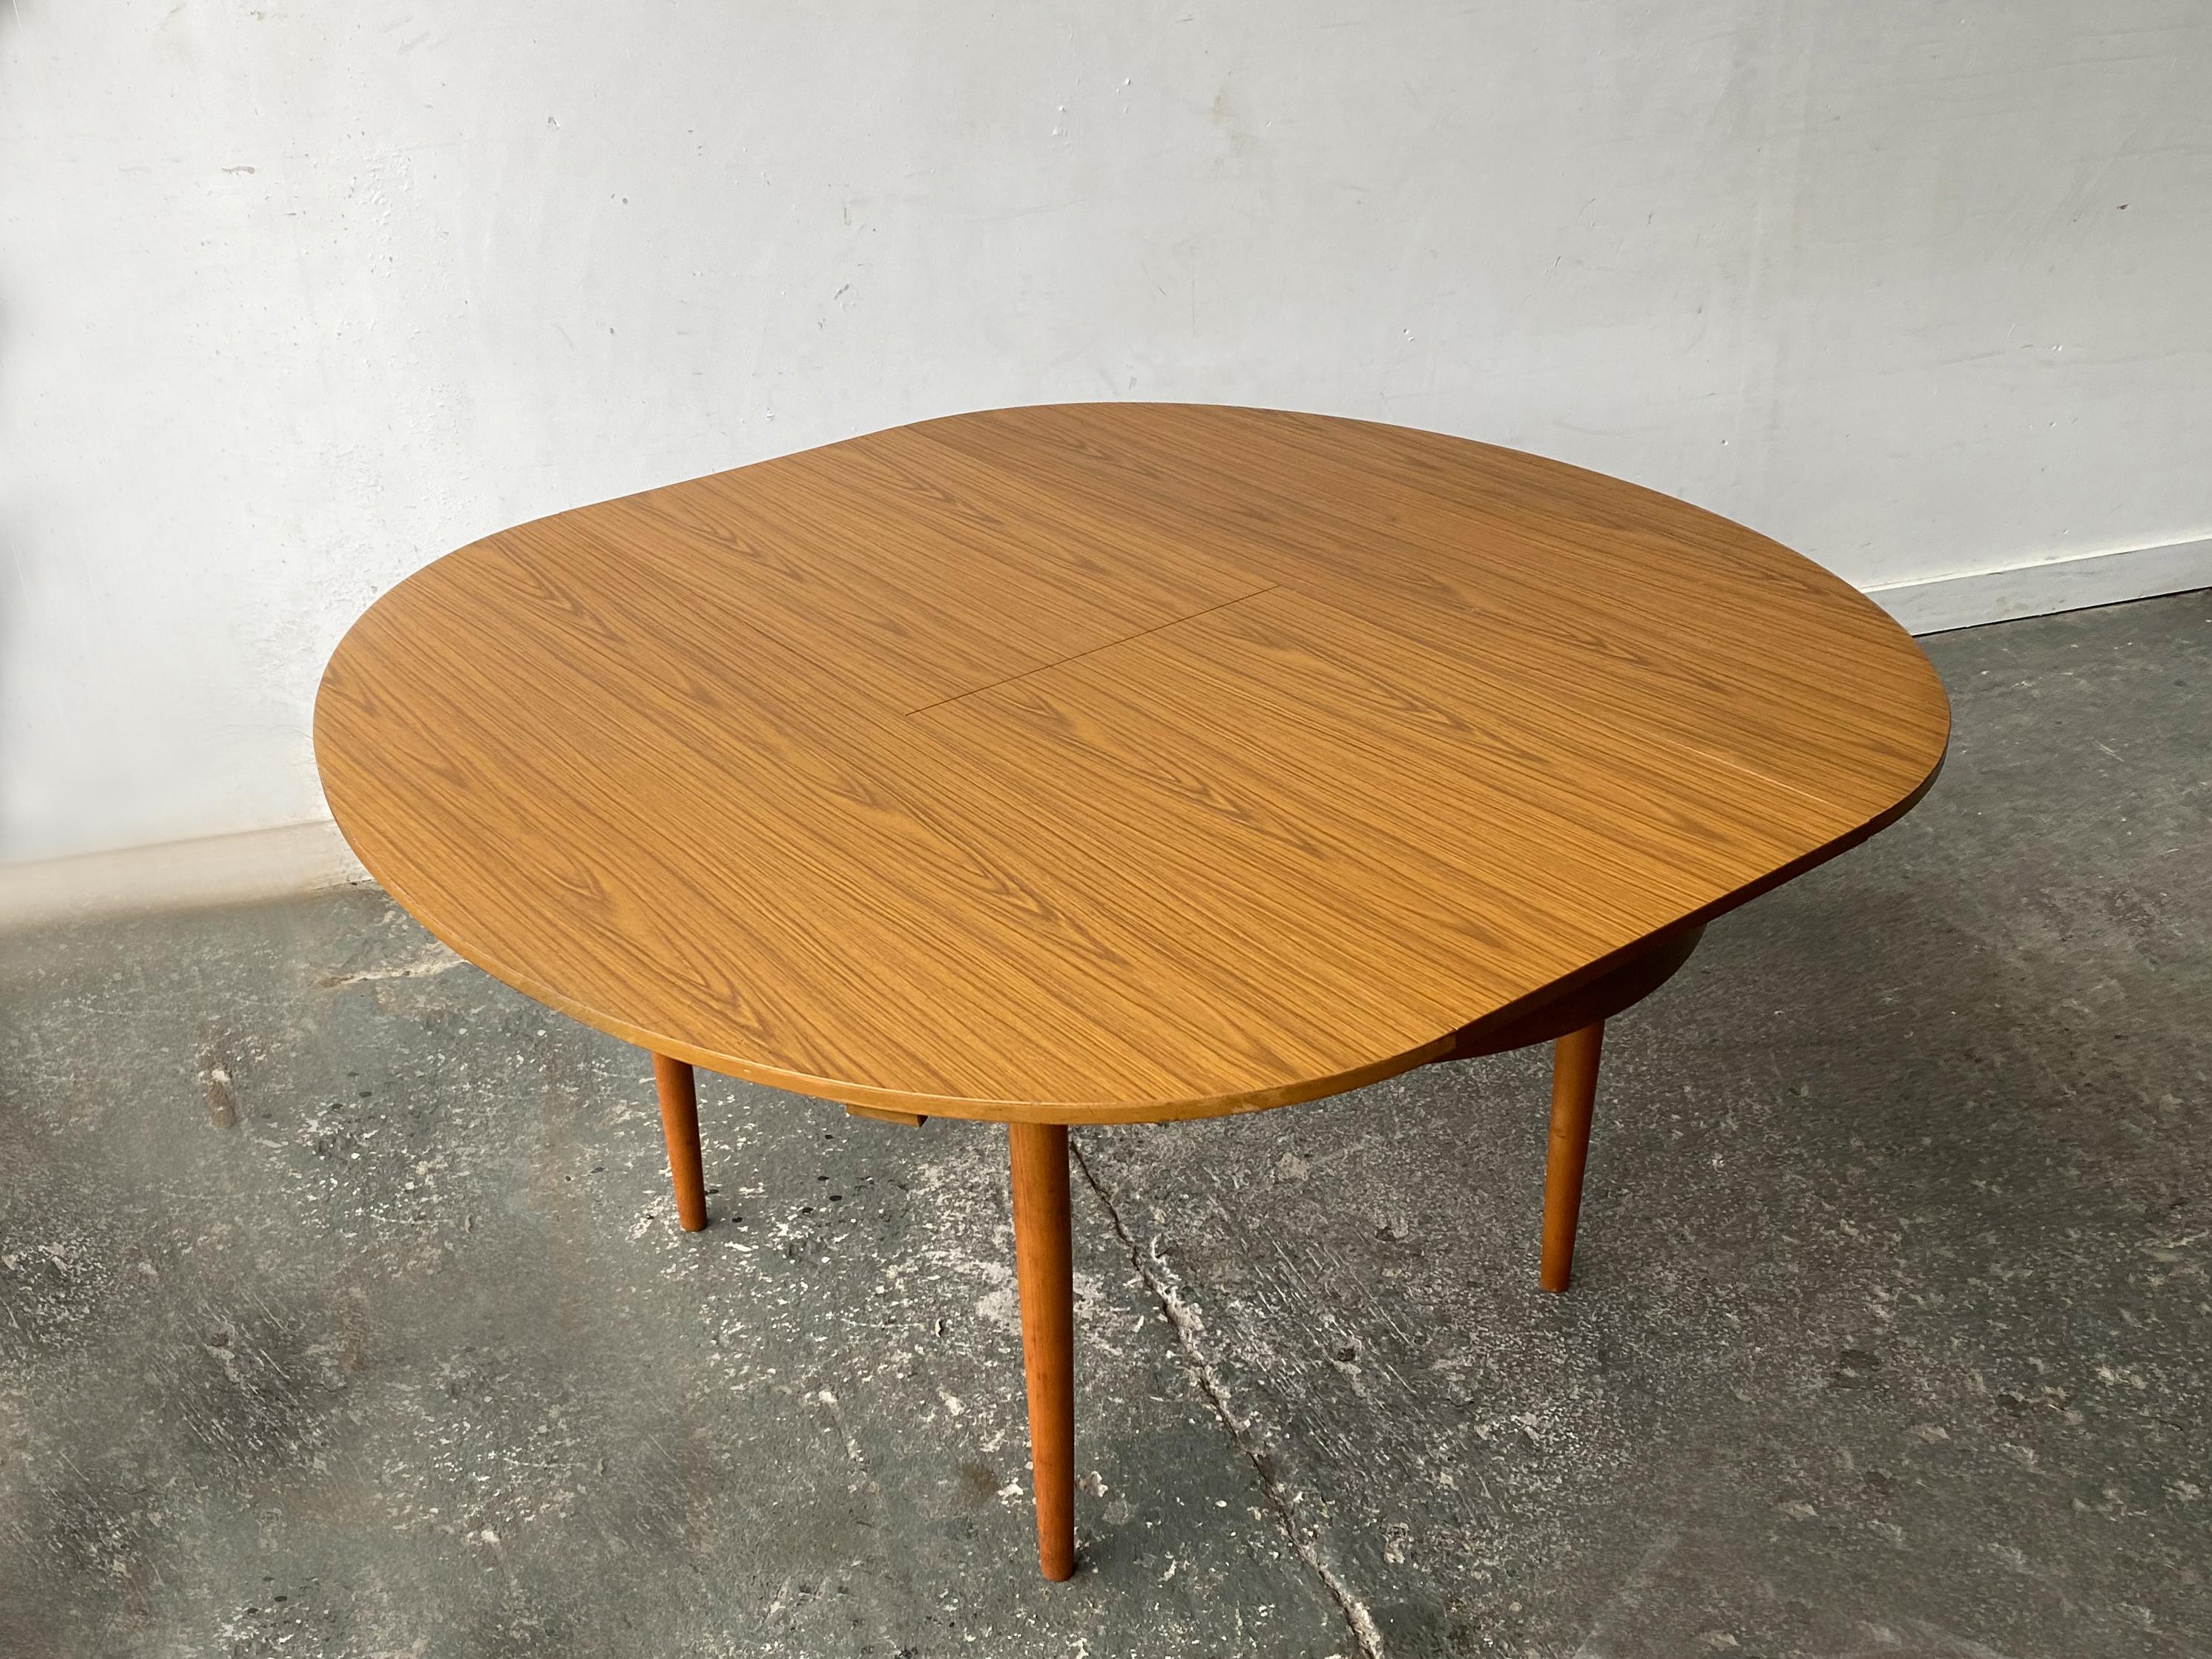 Dining set by Schreiber Furniture - 1960’s mid century modern In Good Condition For Sale In London, GB